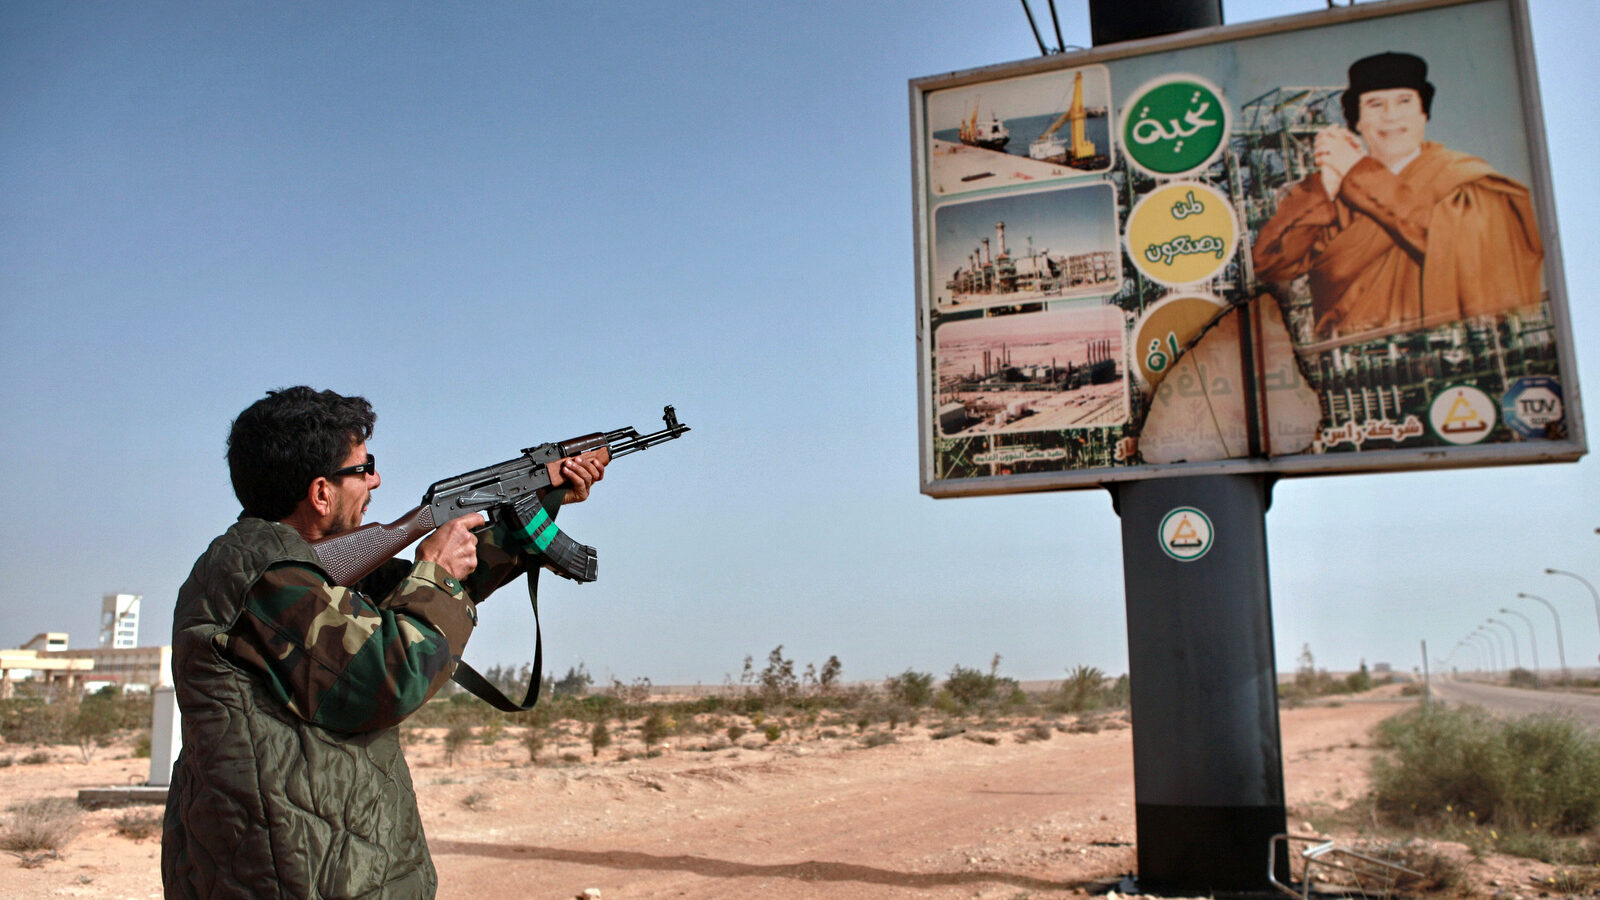 An armed Libyan rebel shoots an AK-47 at a poster of Muhammar Gaddafi in the captured rebel town of Ras-Lanuf in the east of the country (Photo: Andrey Stenin/Sputnik)